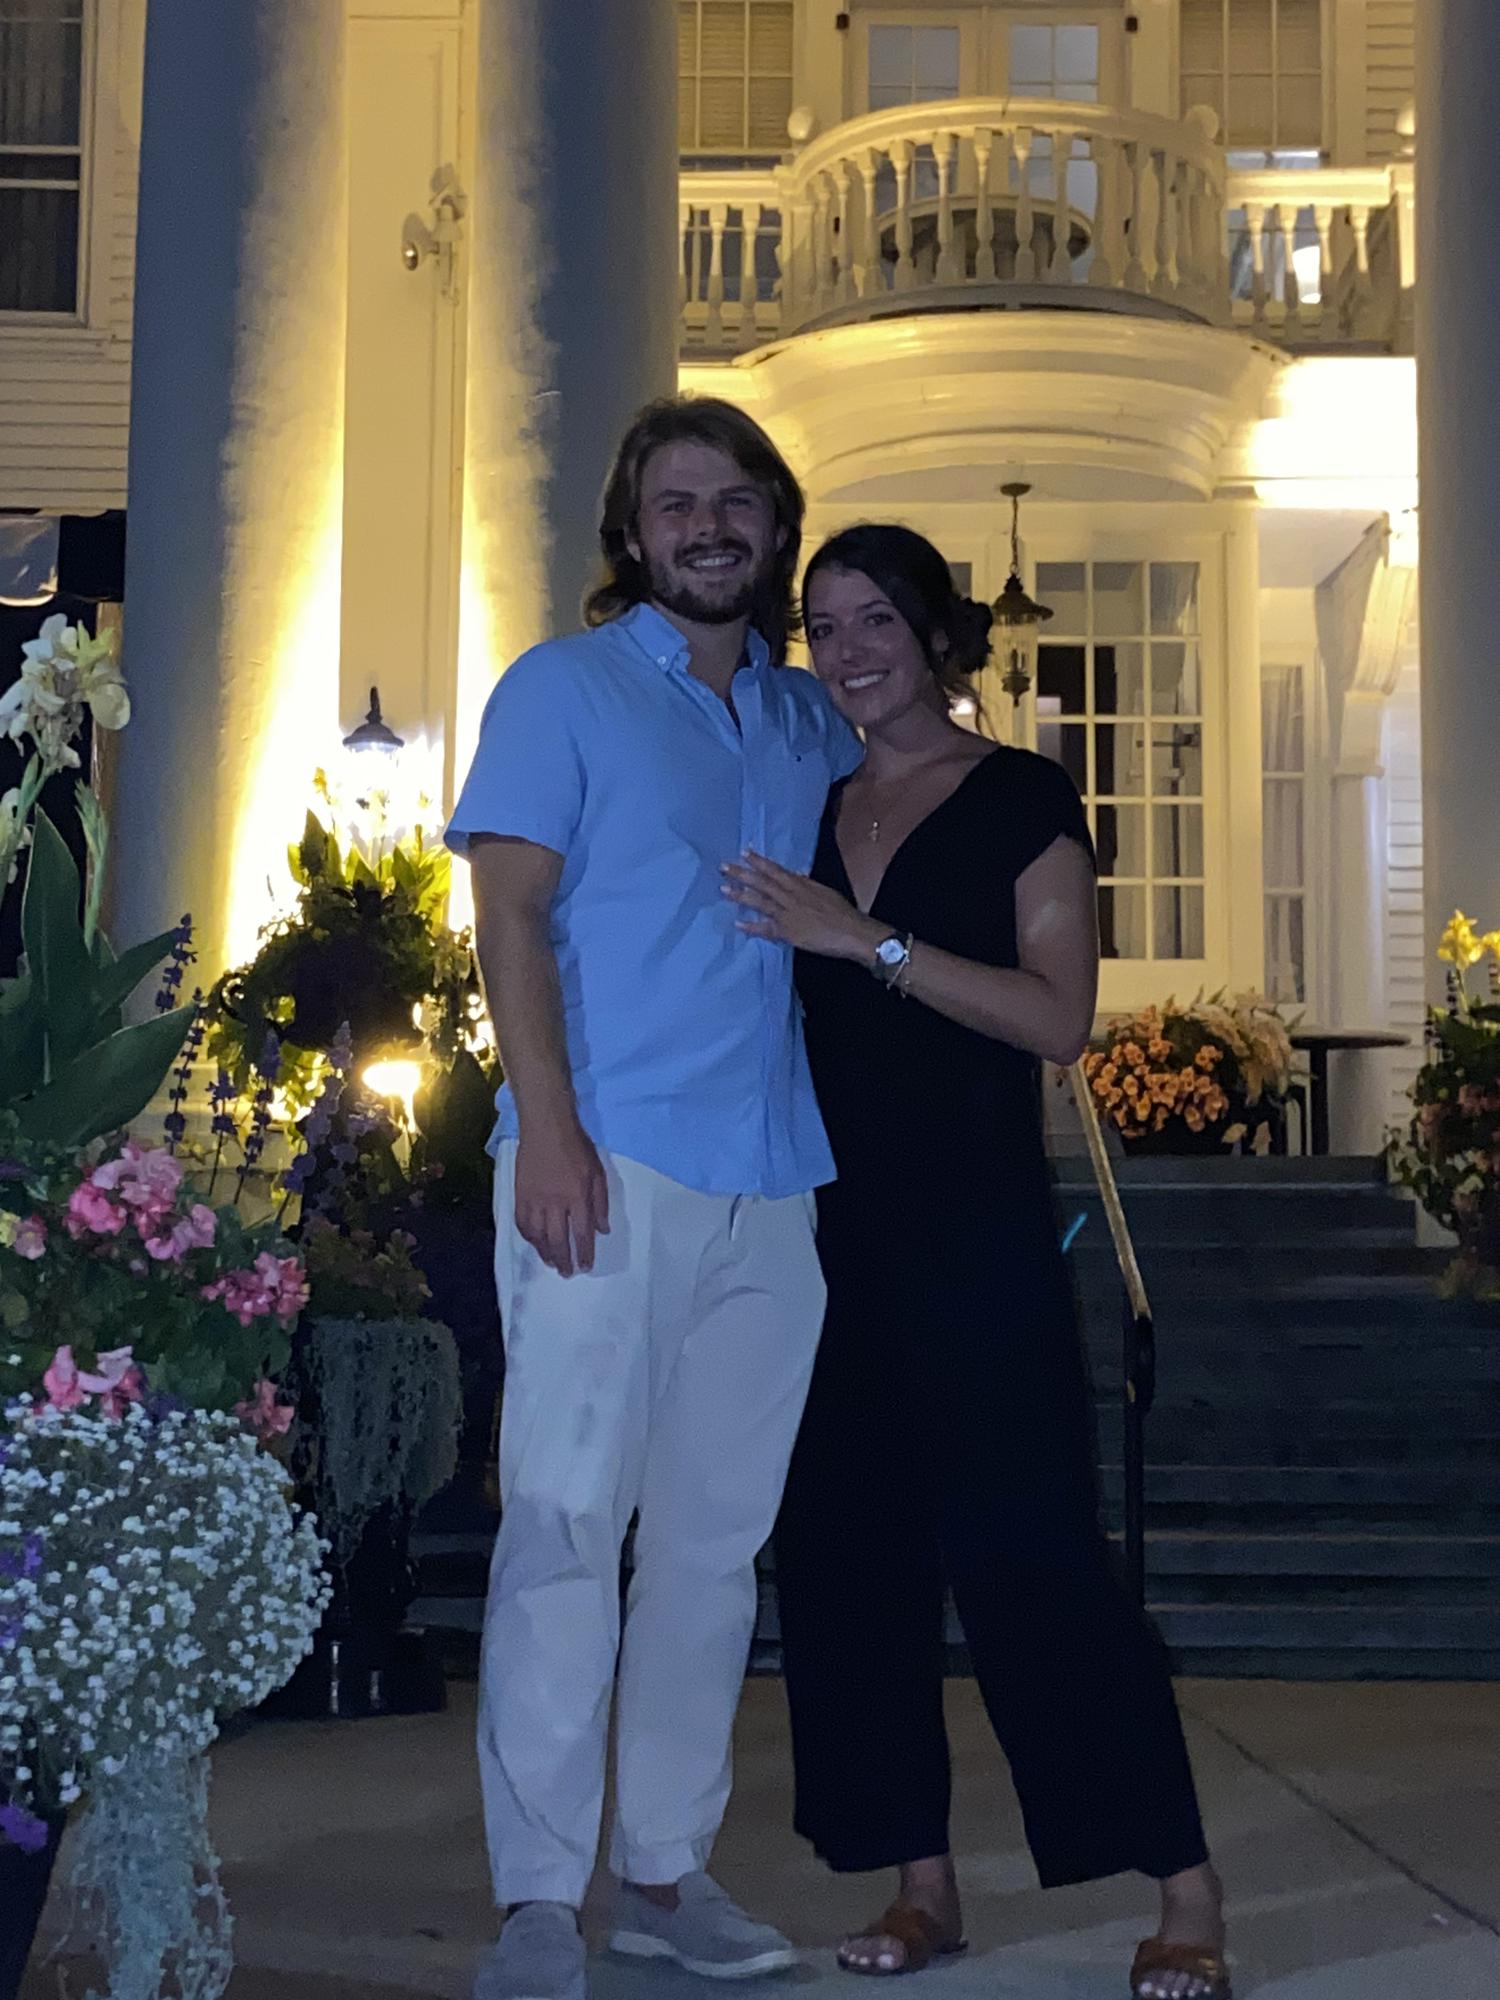 September 4, 2022 - in front of the Peter Shields Inn after we got engaged!